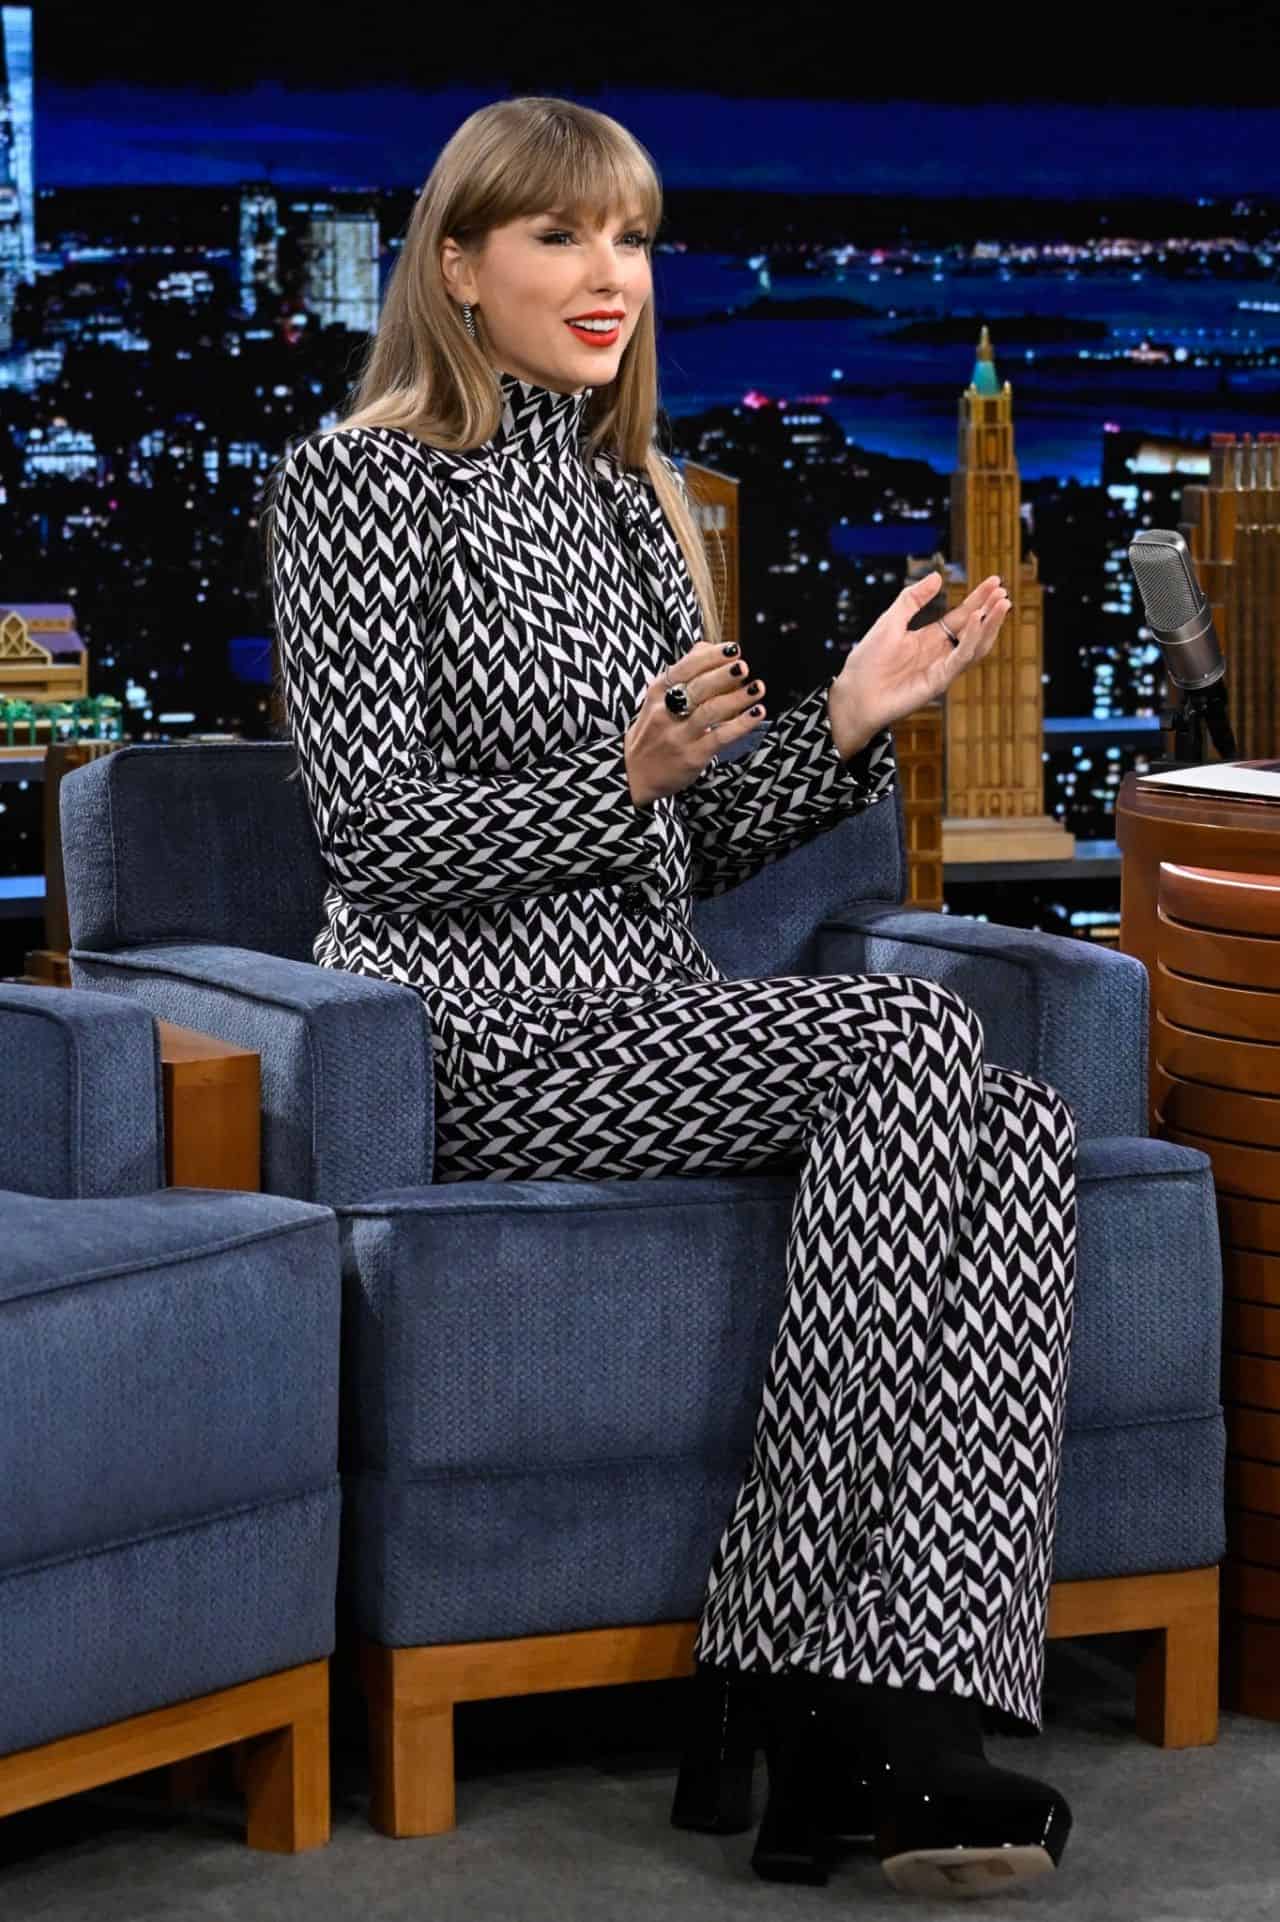 Taylor Swift Looks Chic in a Geometric Patterned Suit on "The Tonight Show"